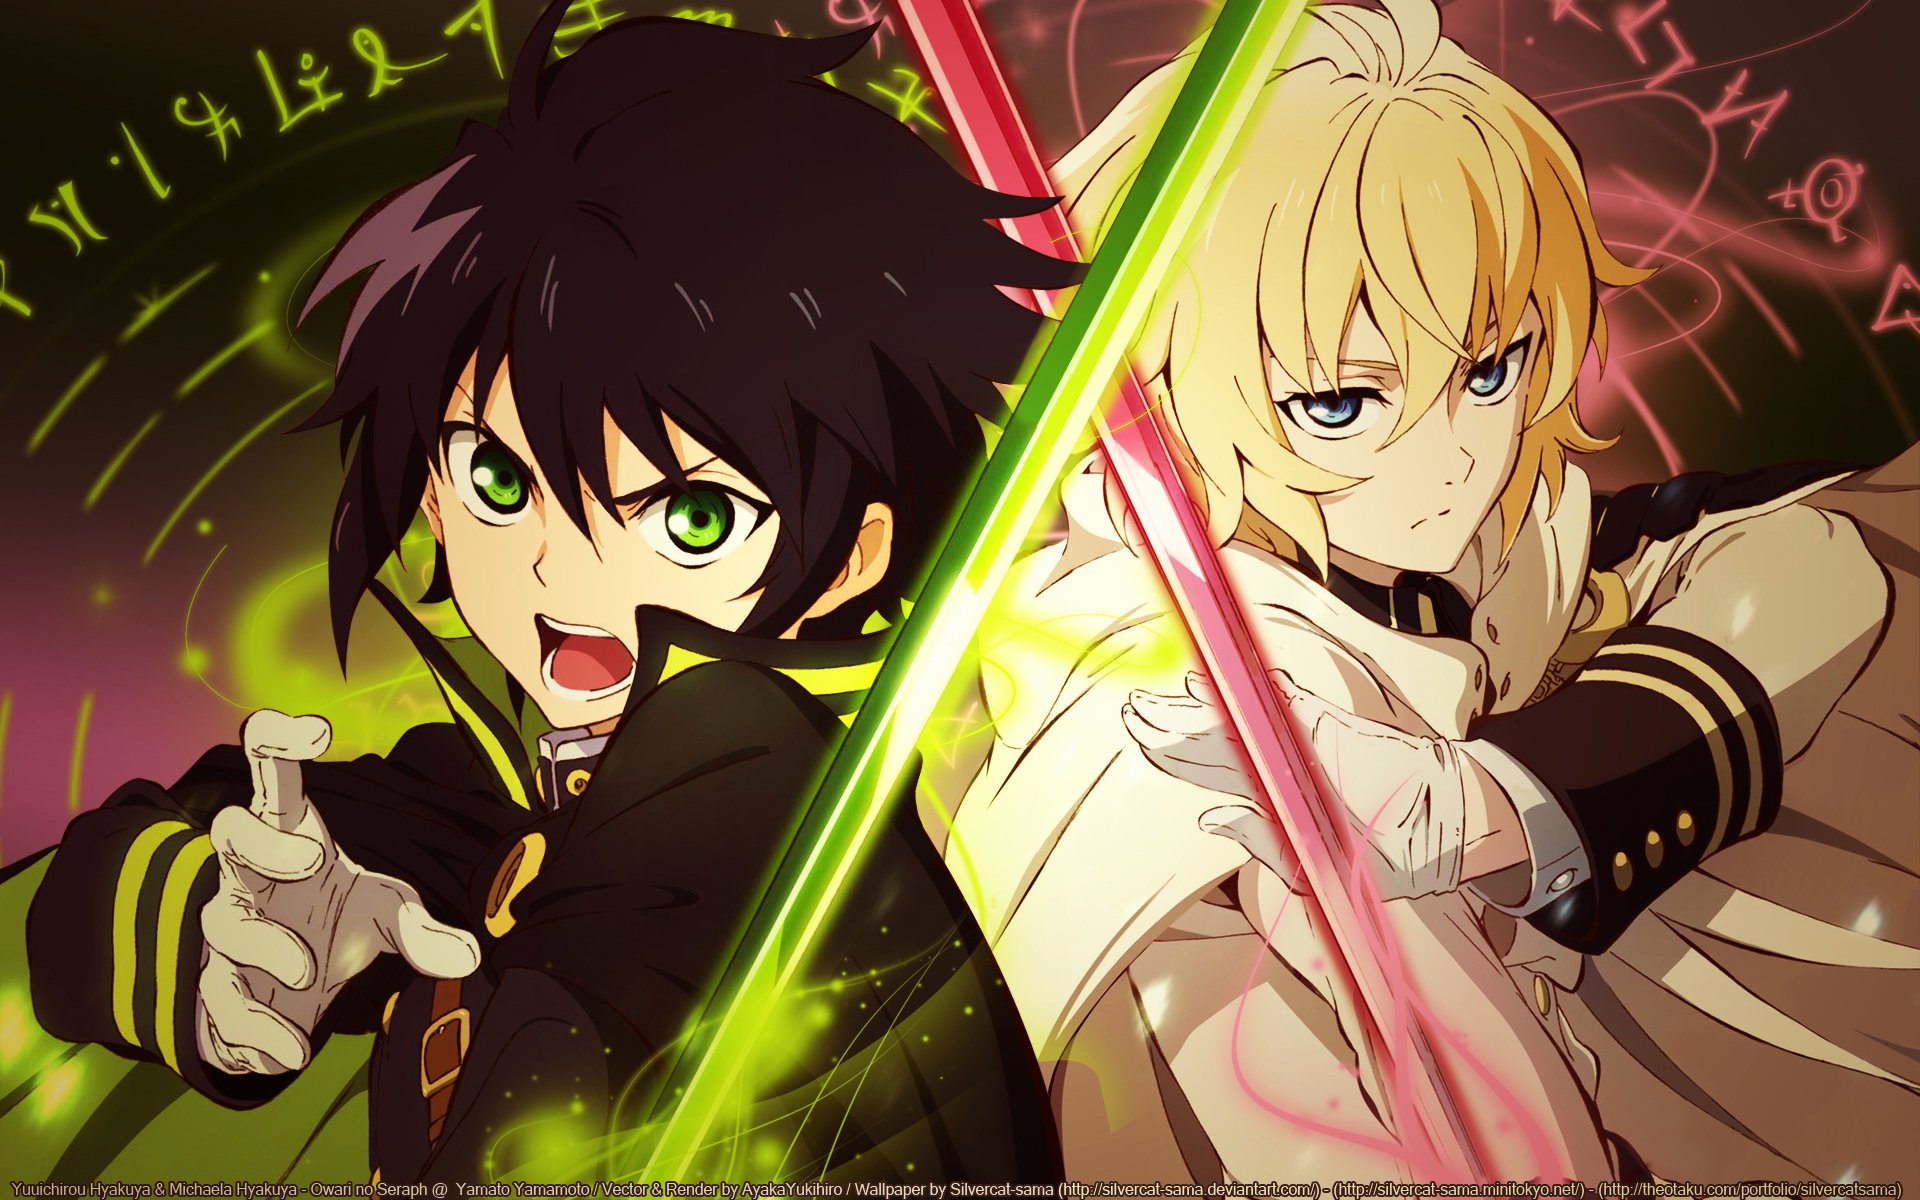  Seraph  of the End  HD Wallpaper  Background Image 